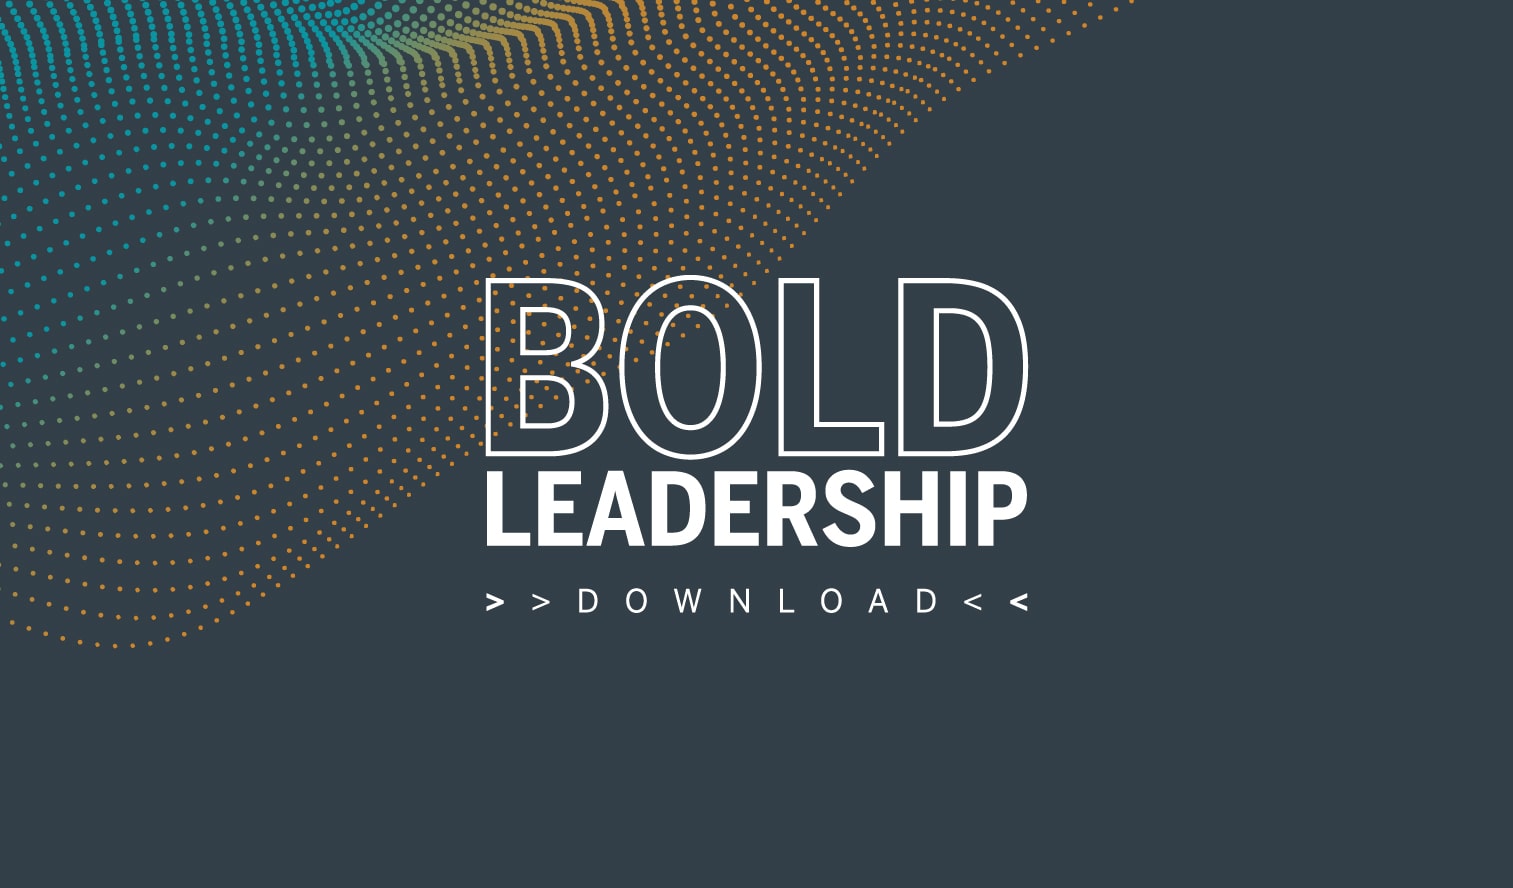 greyscale event page banner for the Bold Leadership Download series